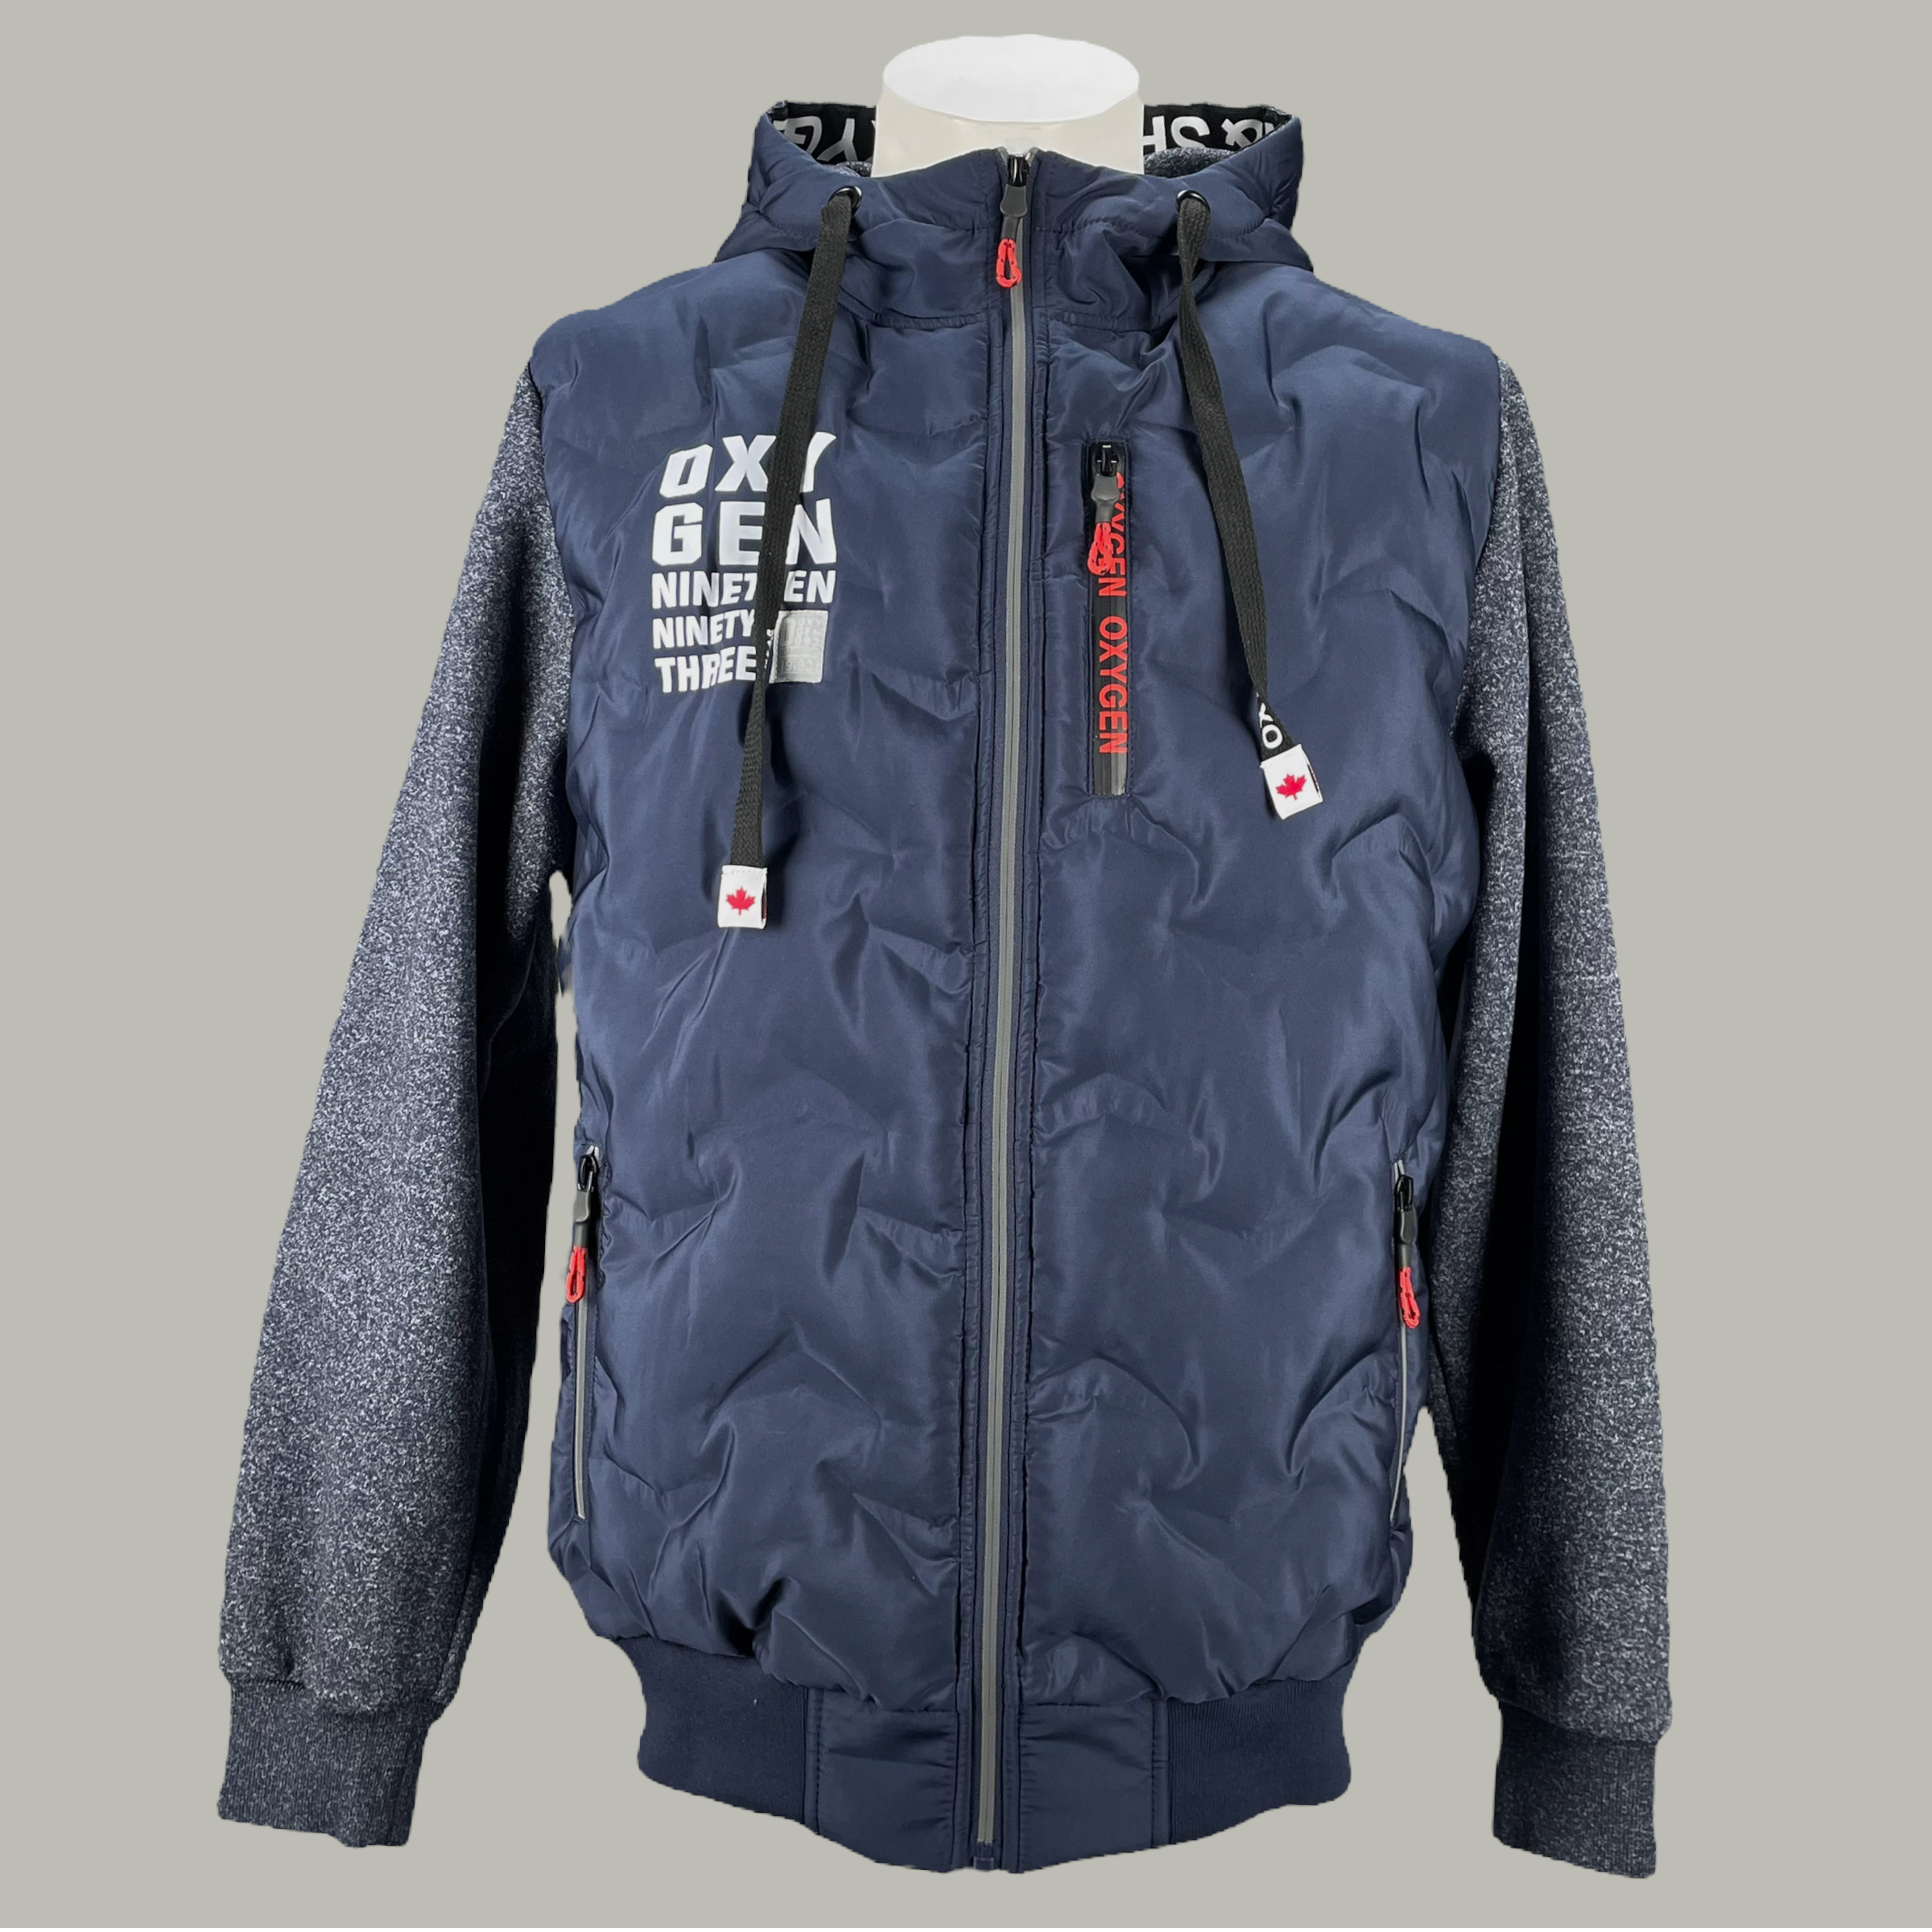 MS100-446NAVY NAVY HOODY WITH CORD